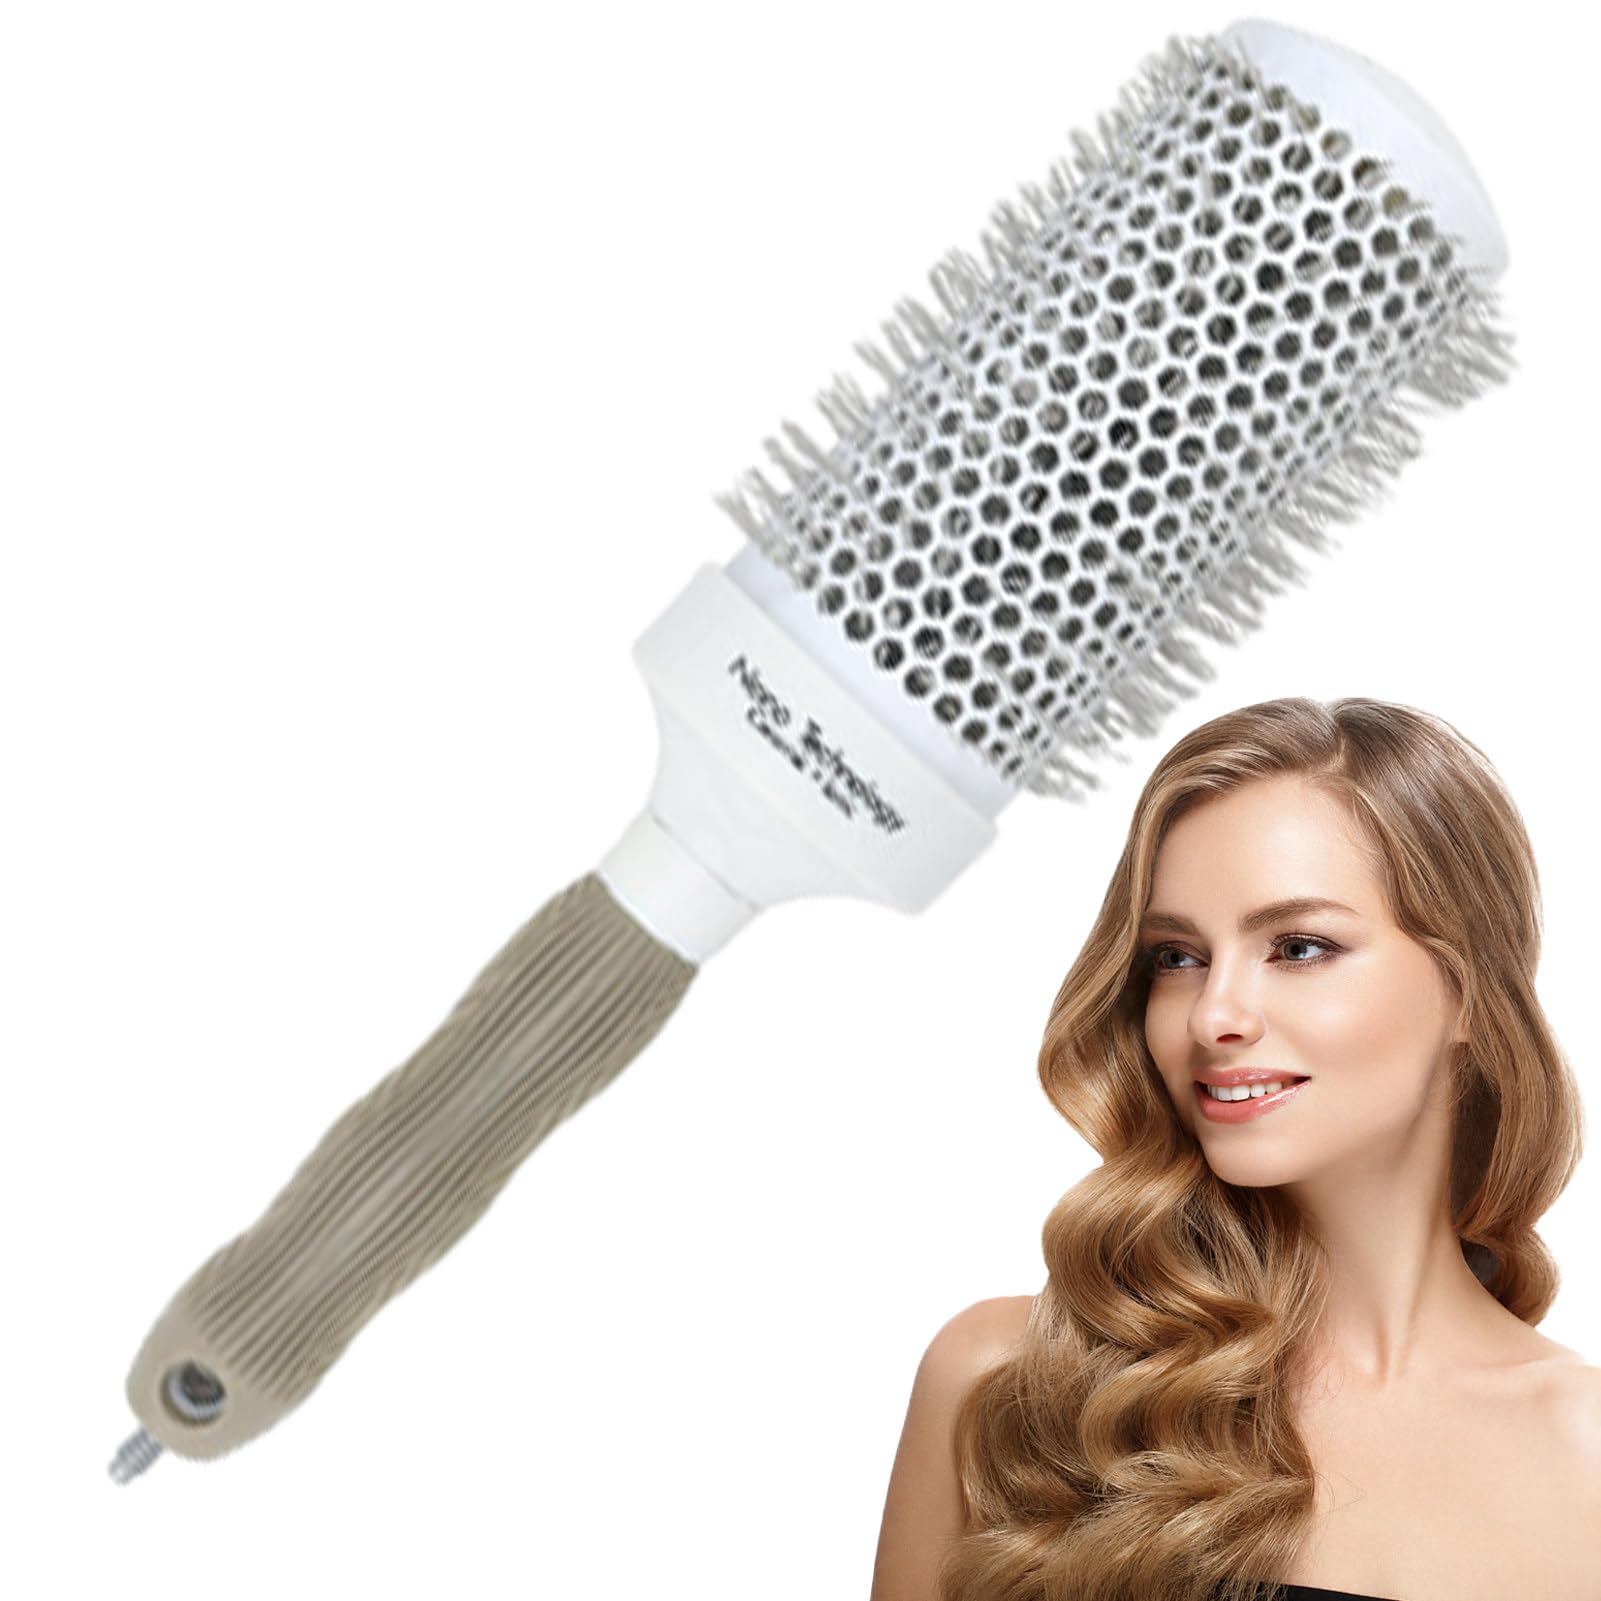 Roller Hair Brush | Aluminum Round Brush with Anti-Slip Handle | Volume Up Hairstyle Tool, Soft Salon Hairdressing Tool for Styling, Curling and Sensitive Scalp Biwingarden